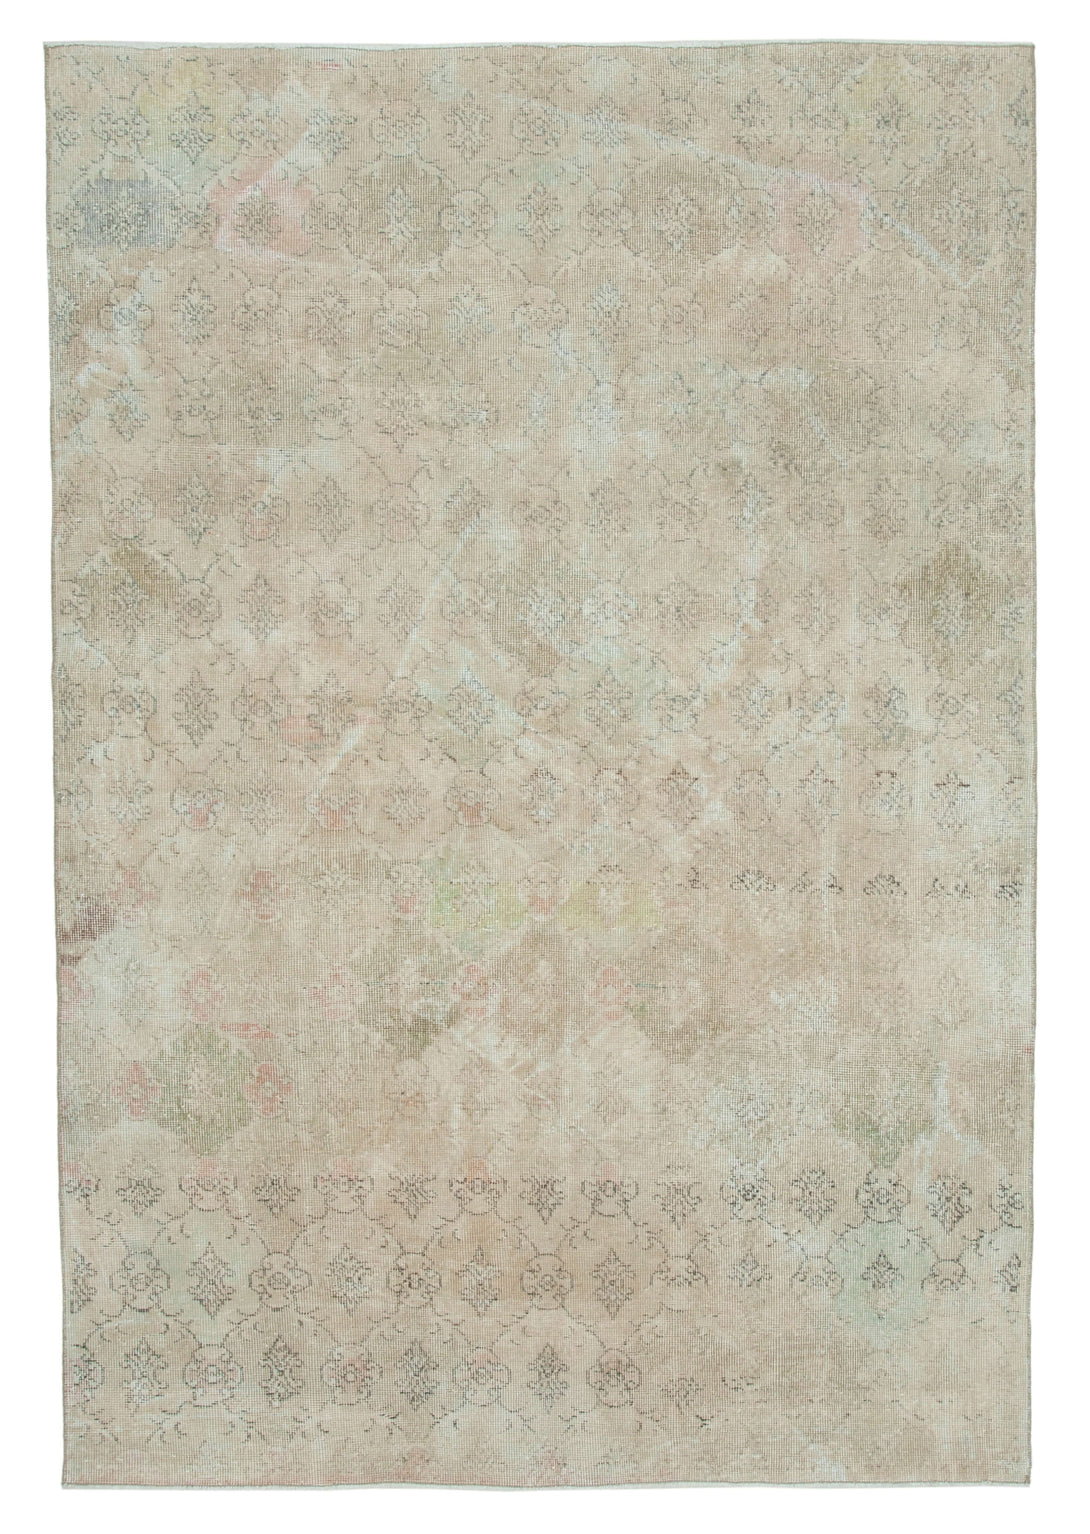 Handmade Geometric Area Rug > Design# OL-AC-21807 > Size: 5'-9" x 8'-6", Carpet Culture Rugs, Handmade Rugs, NYC Rugs, New Rugs, Shop Rugs, Rug Store, Outlet Rugs, SoHo Rugs, Rugs in USA